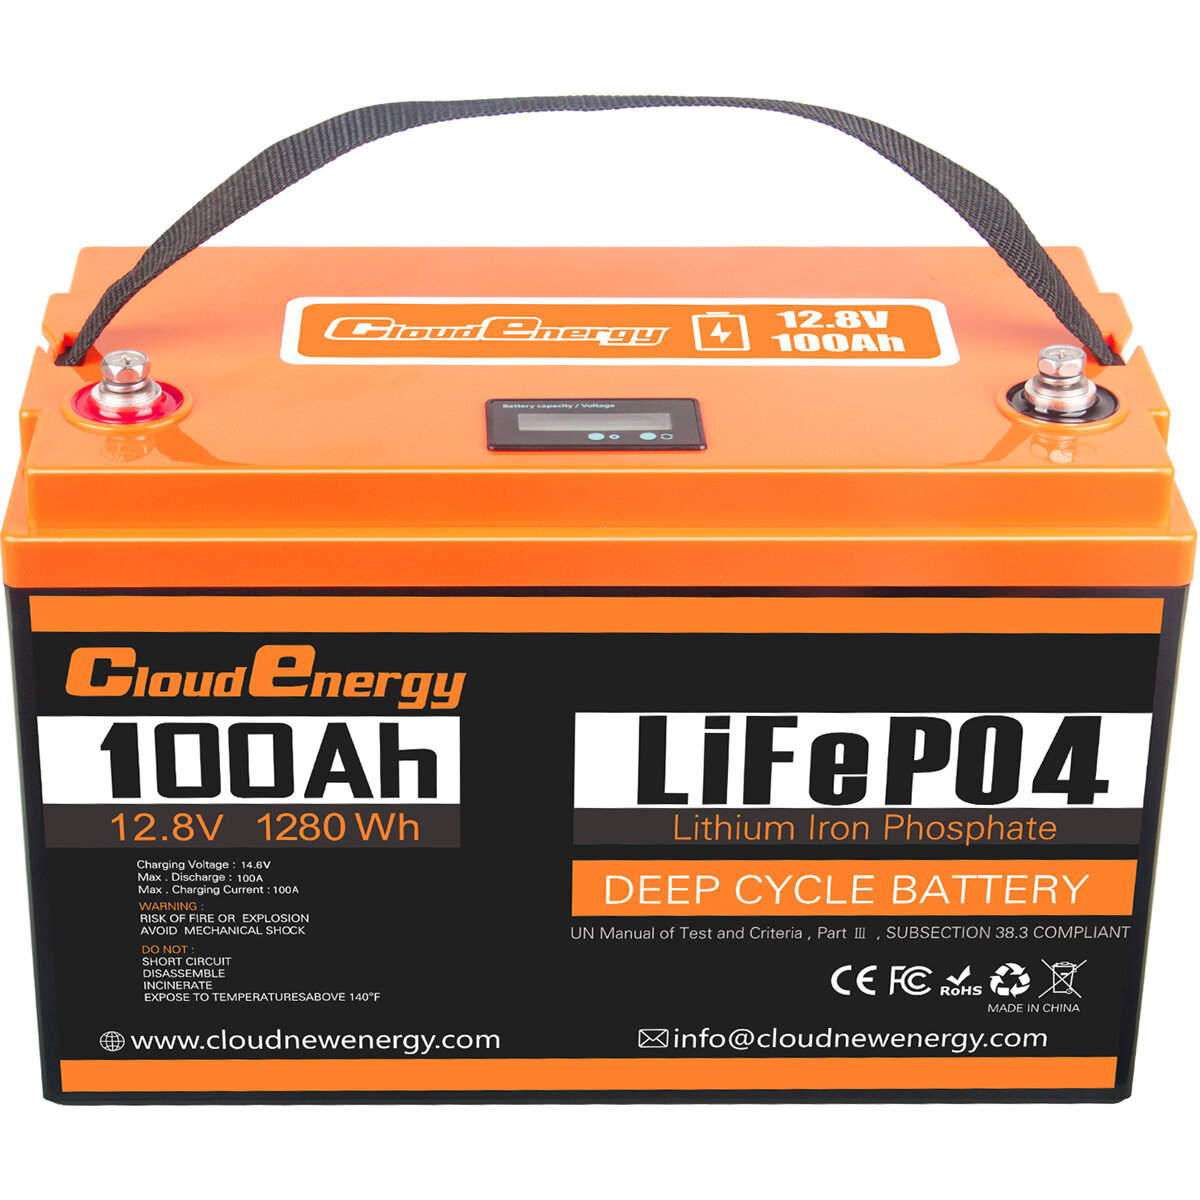 best price,cloudenergy,12v,100ah,lifepo4,battery,pack,1280wh,eu,discount